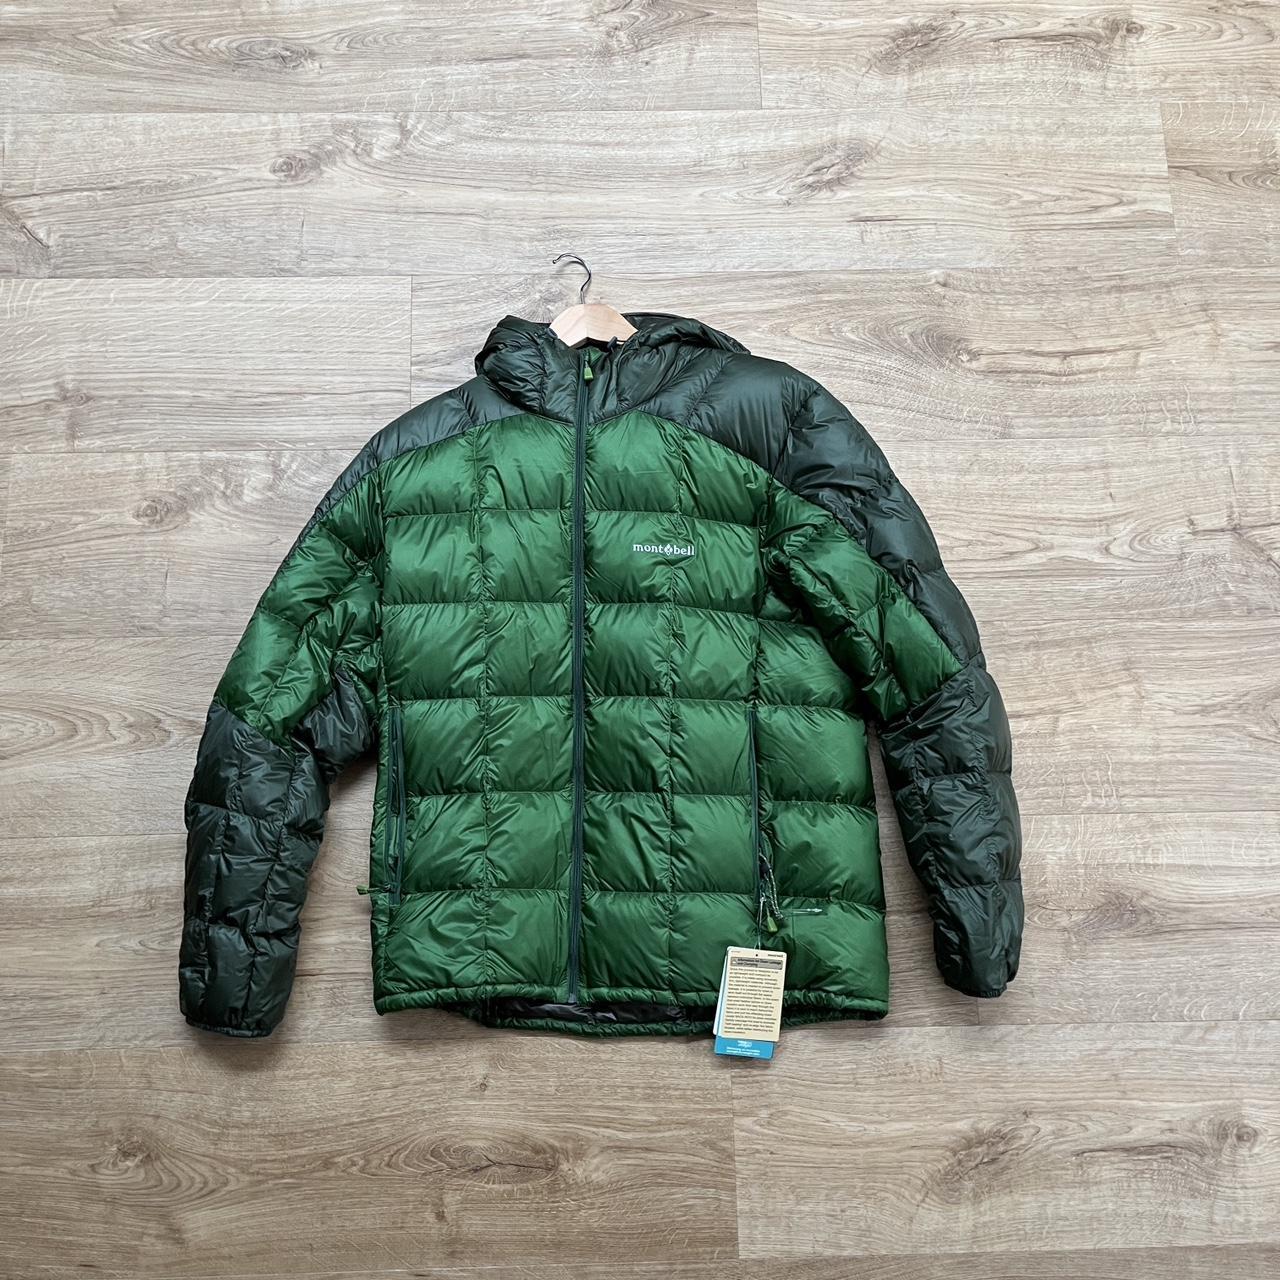 Montbell Superior Down Parka • Please note the... - Depop